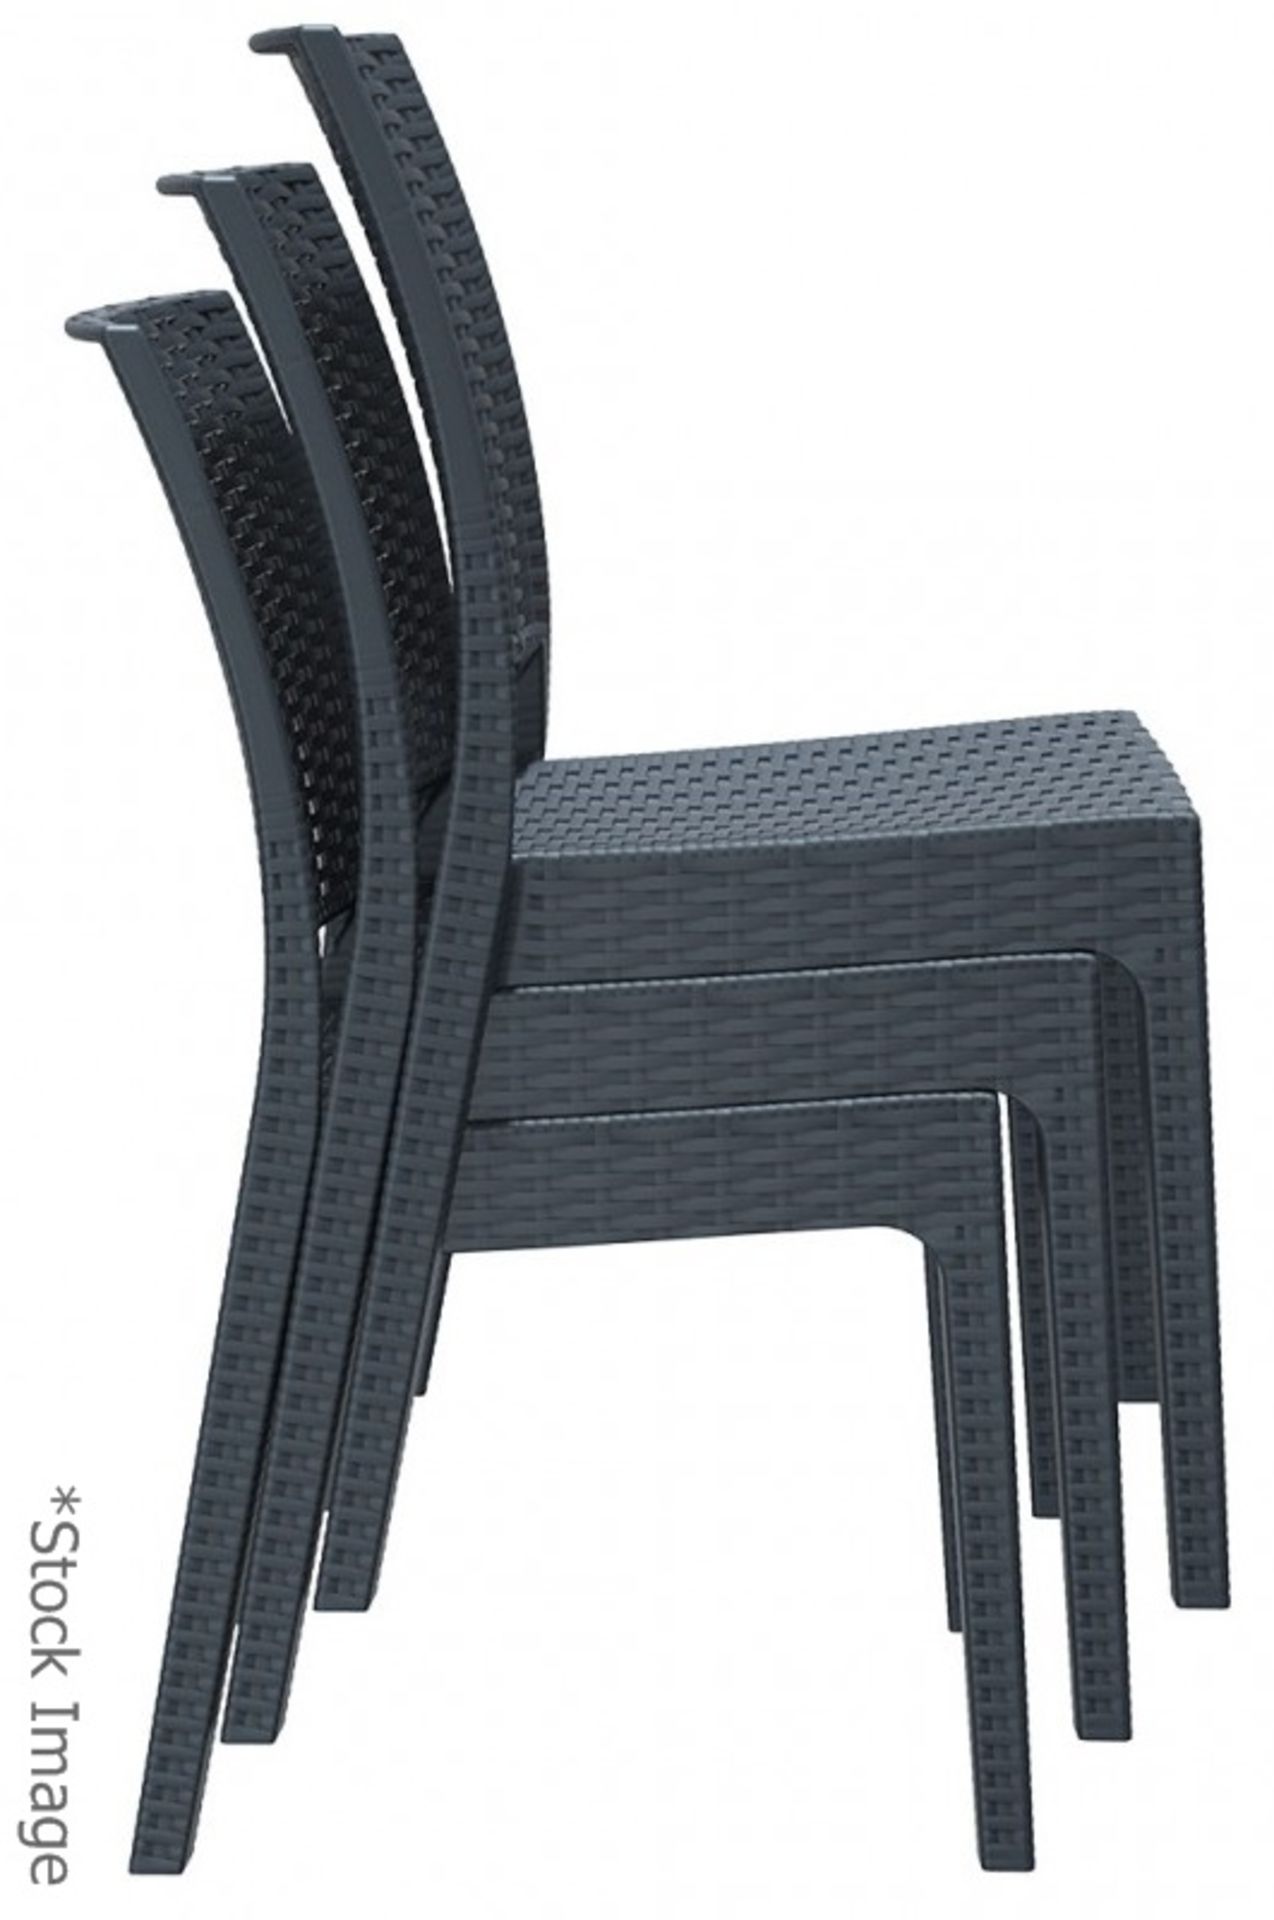 4 x Siesta 'Florida' Rattan Style Garden Chairs In Dark Grey - Suitable For Commercial or Home Use - - Image 8 of 14